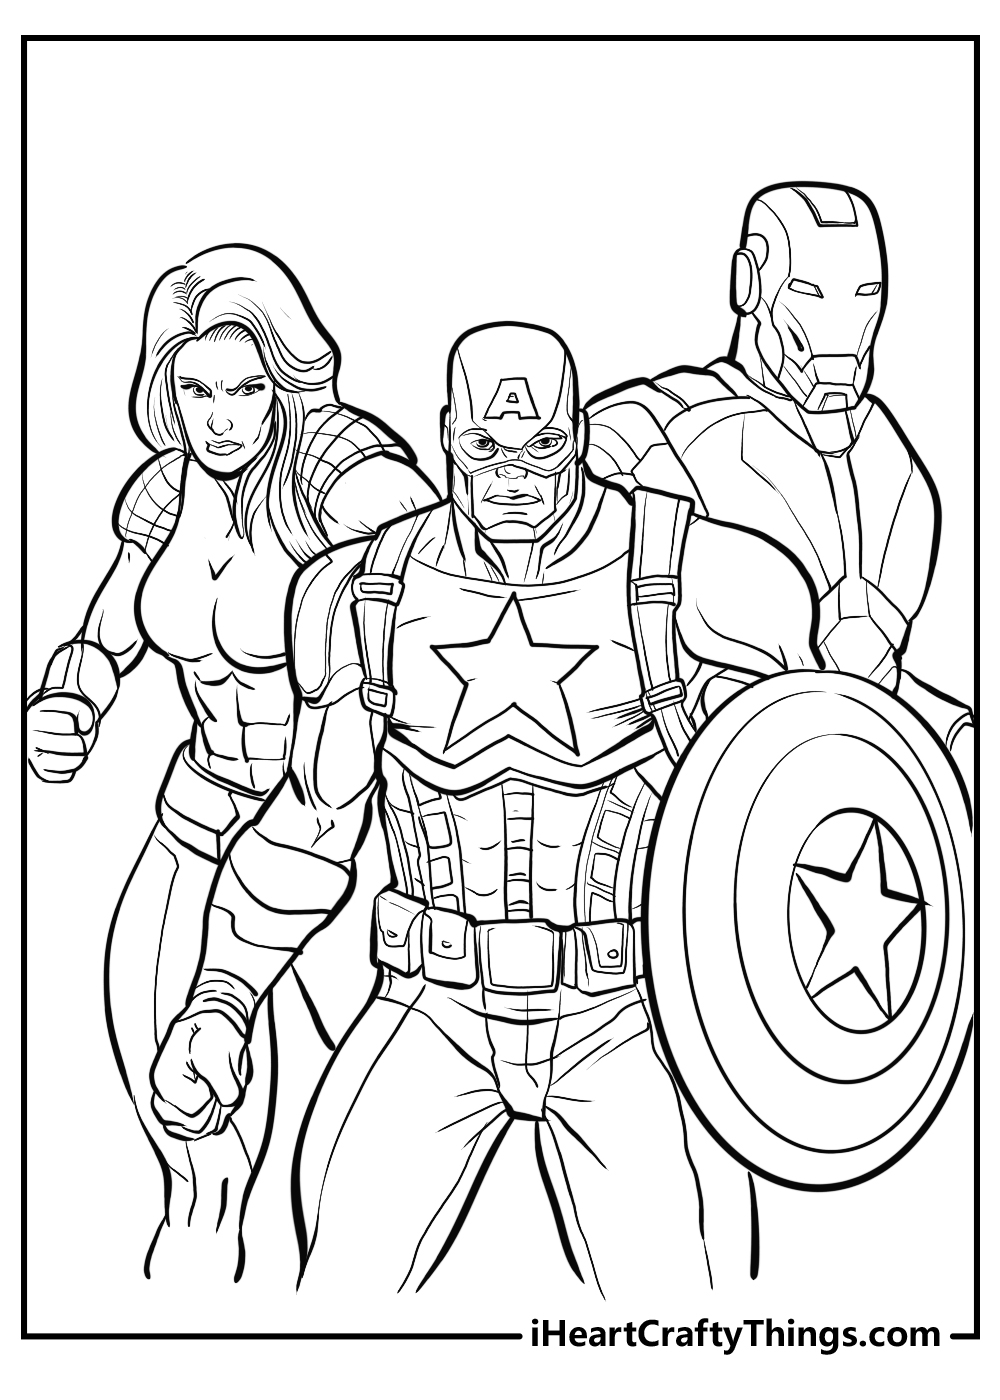 How to Draw the Avengers from the 2012 Film: A Step-by-Step Guide